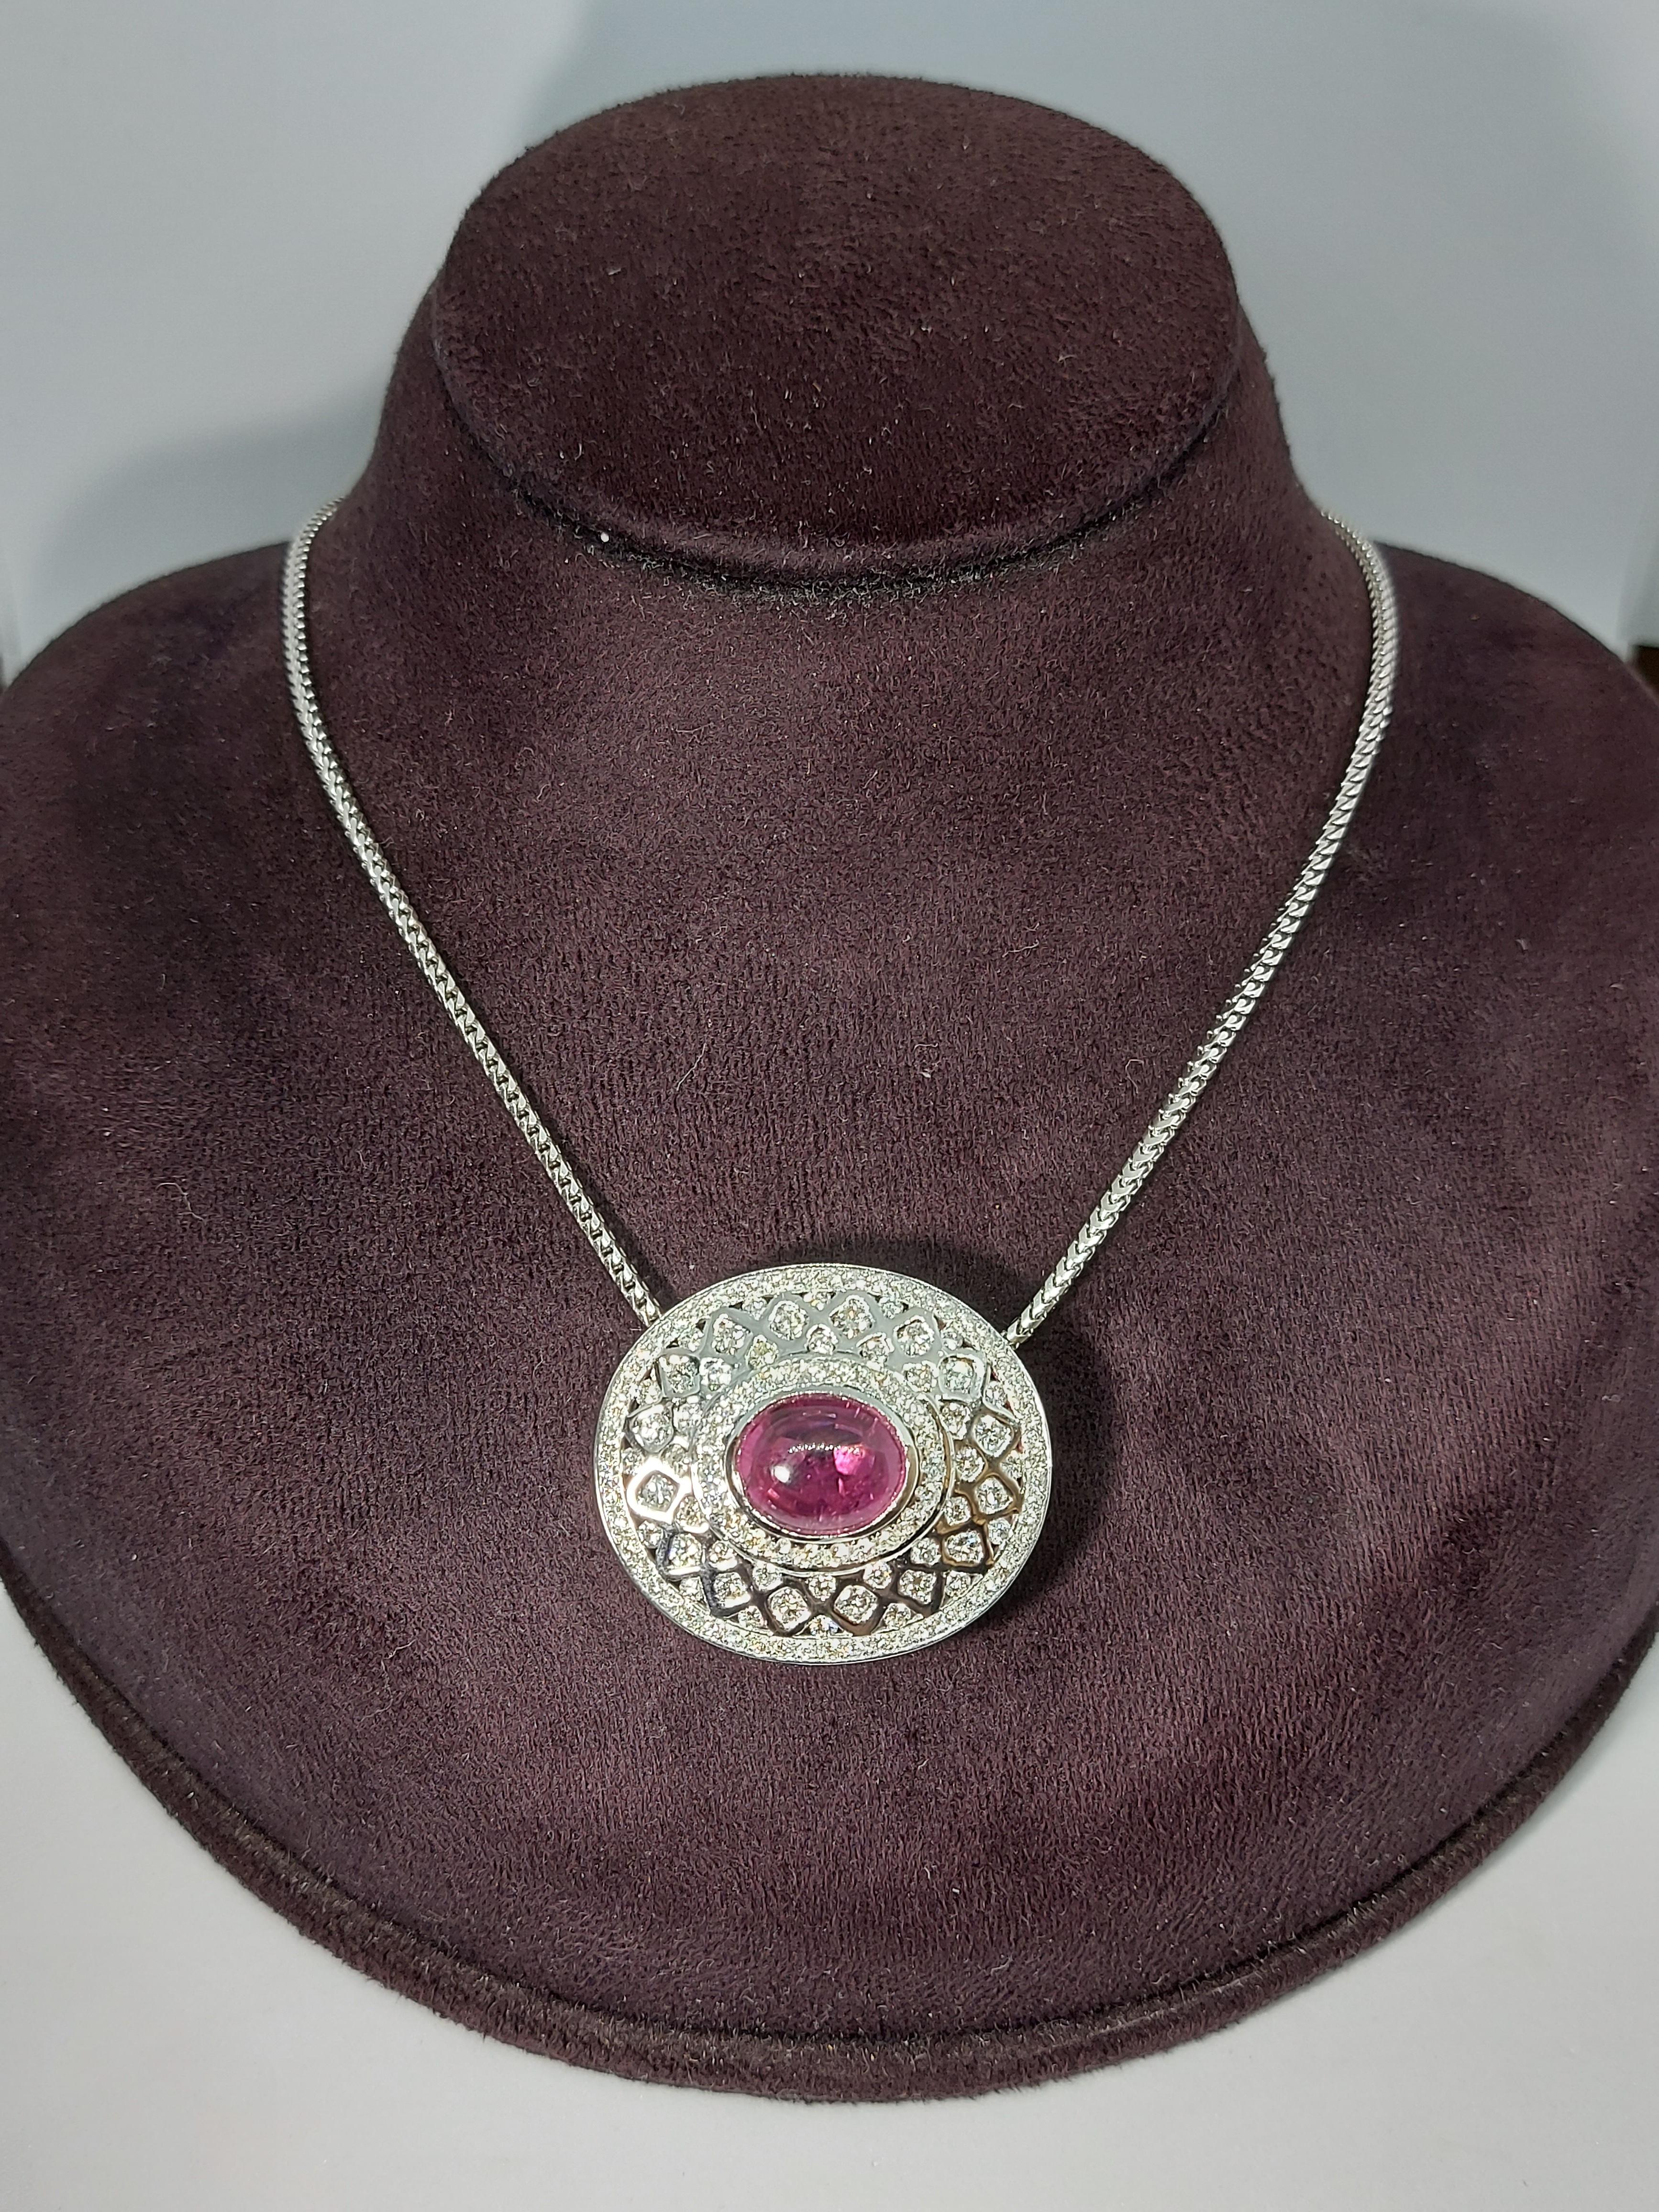 18Kt White Gold Pendant Necklace with 7.72 Ct. Pink Tourmaline, 5 Carat Diamonds For Sale 5